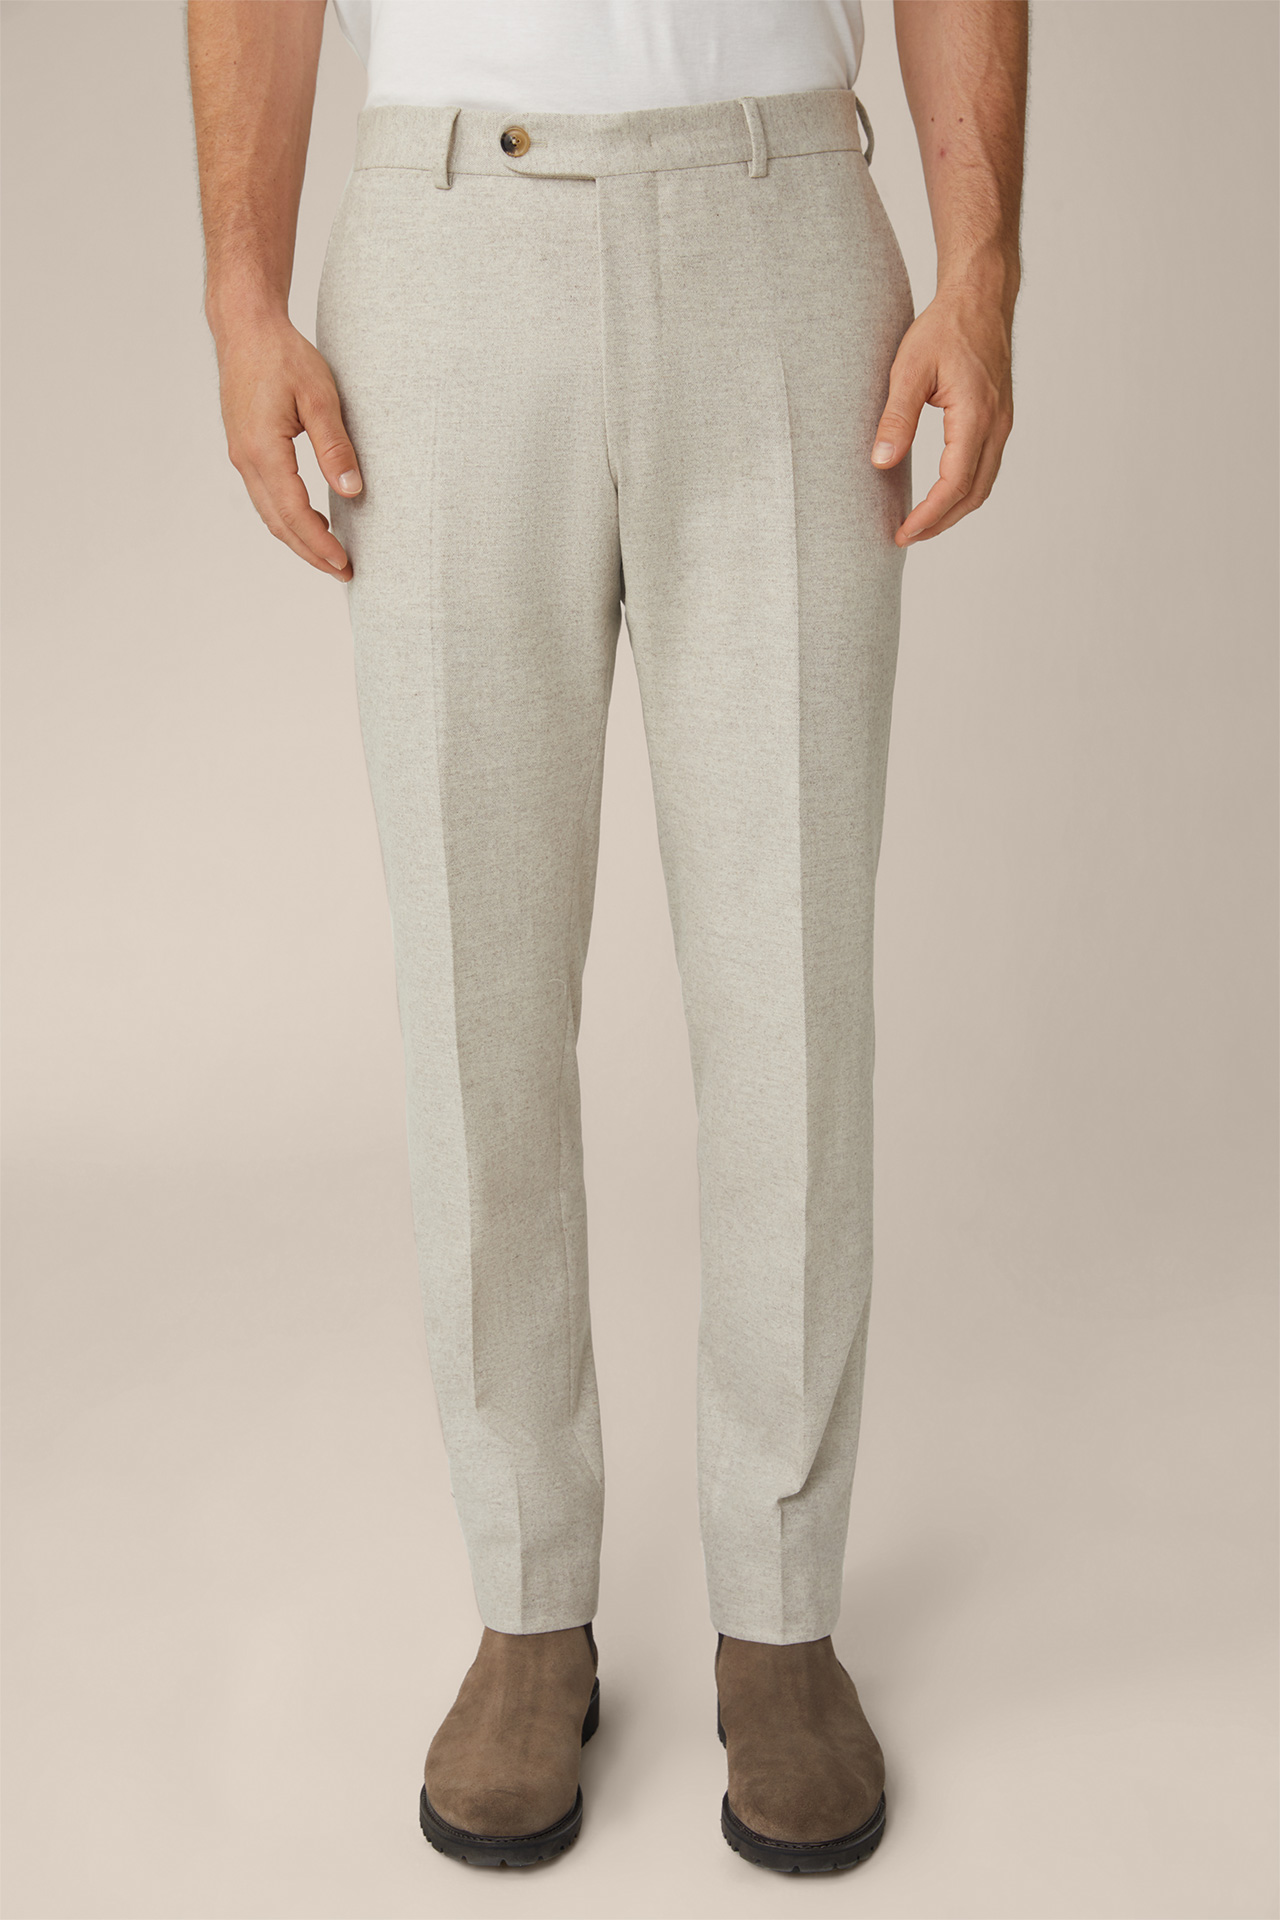 Bene Wool Blend Modular Trousers with Cashmere in Beige Marl